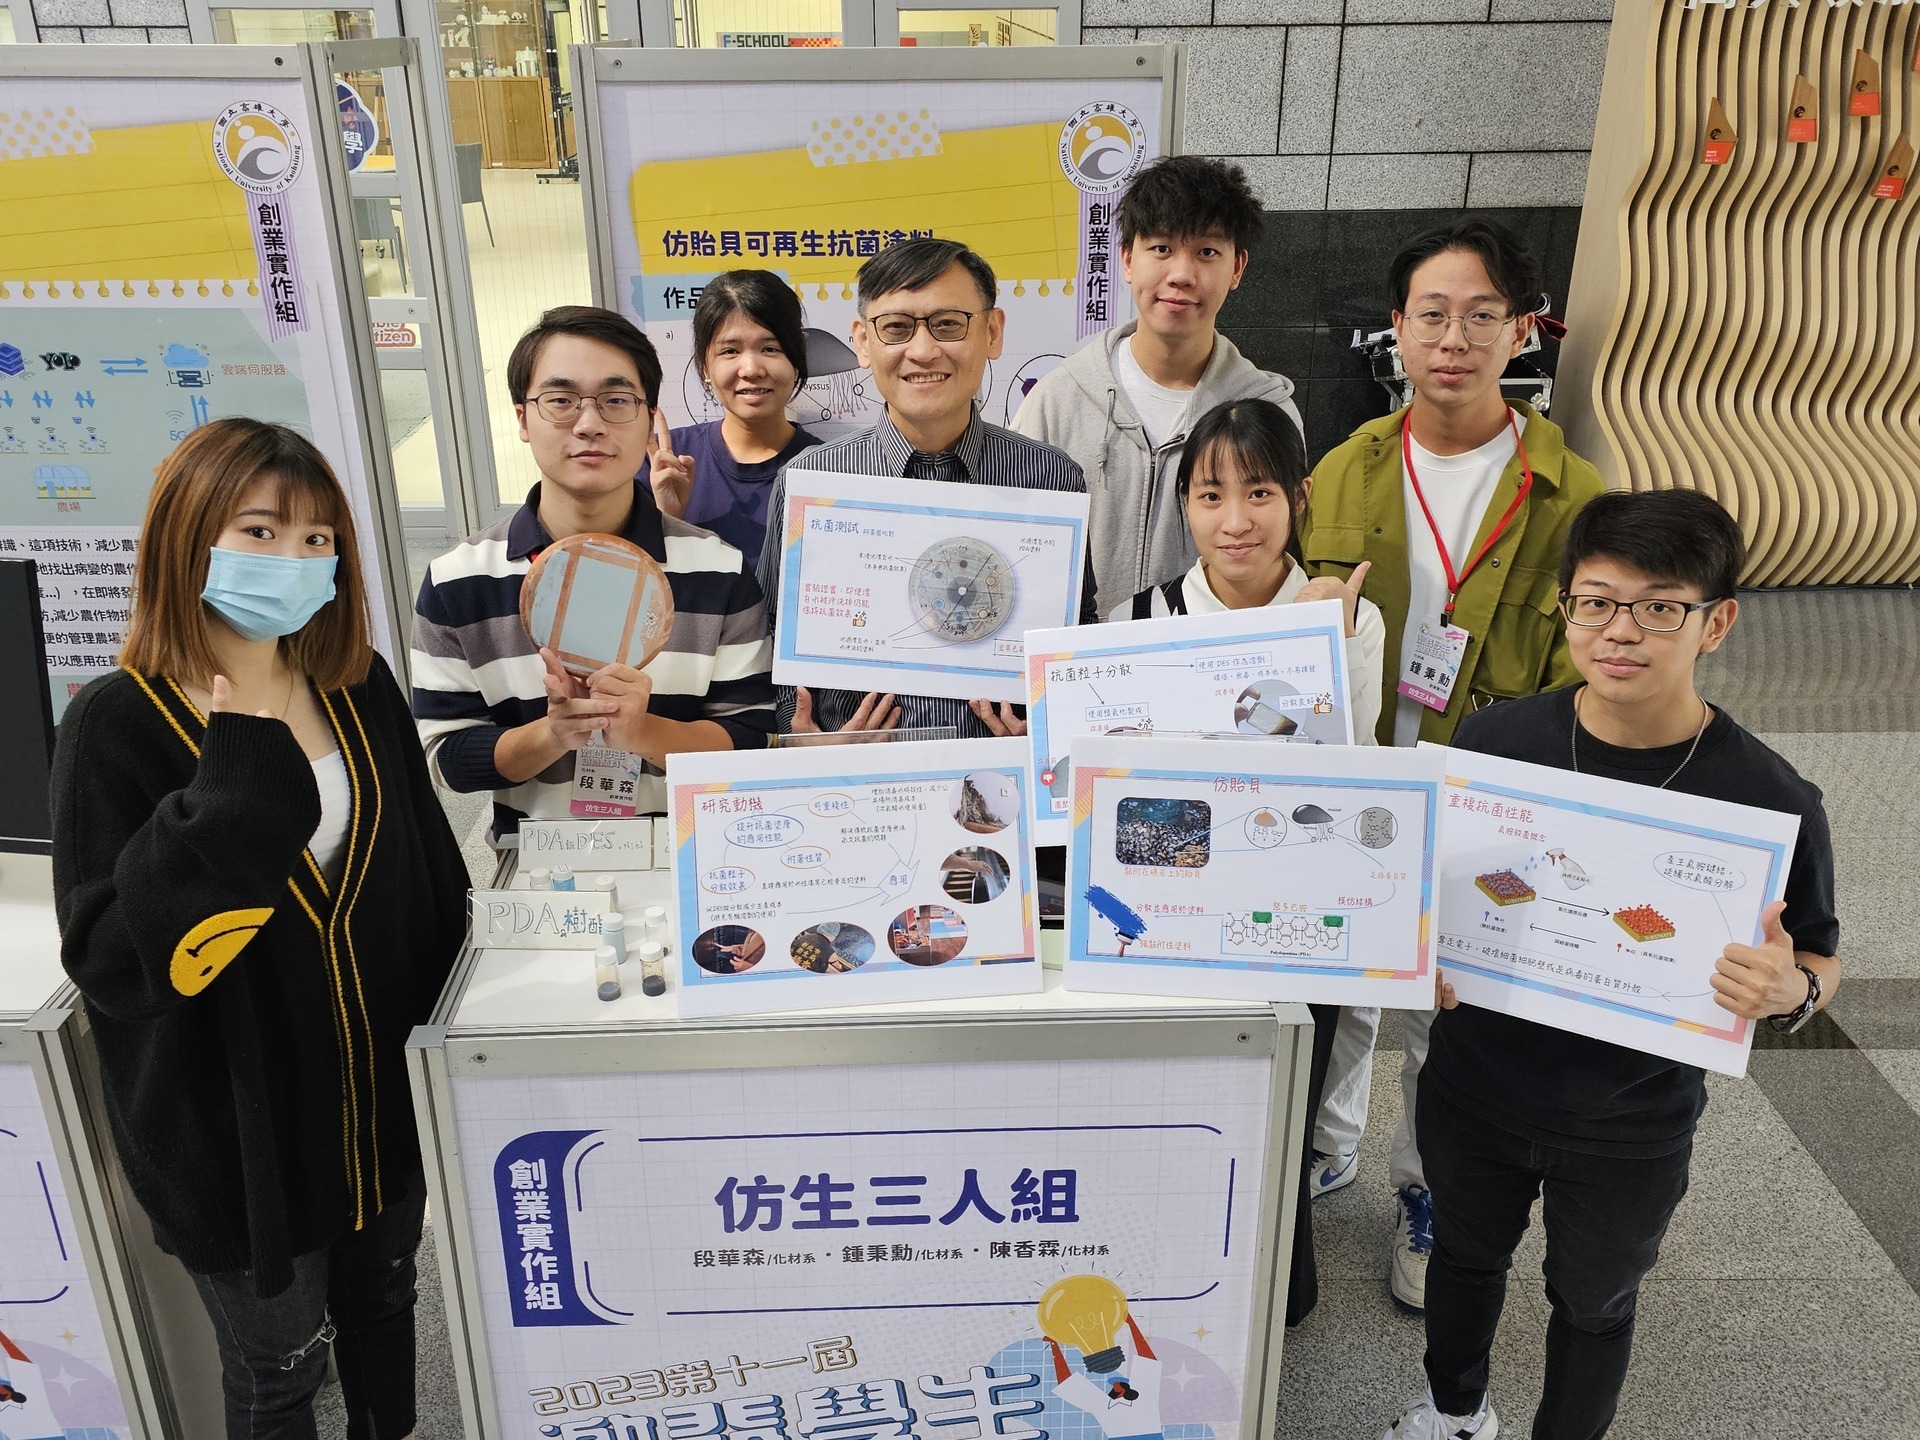 NUK's Department of Chemical and Materials Engineering, under the guidance of Distinguished Professor Yi-Chang Chung, guided three undergraduate students, Duan Huawen, Chung Bingxun, and Chen Xianglin, in developing "Mussel-inspired renewable antibacterial coating." 007